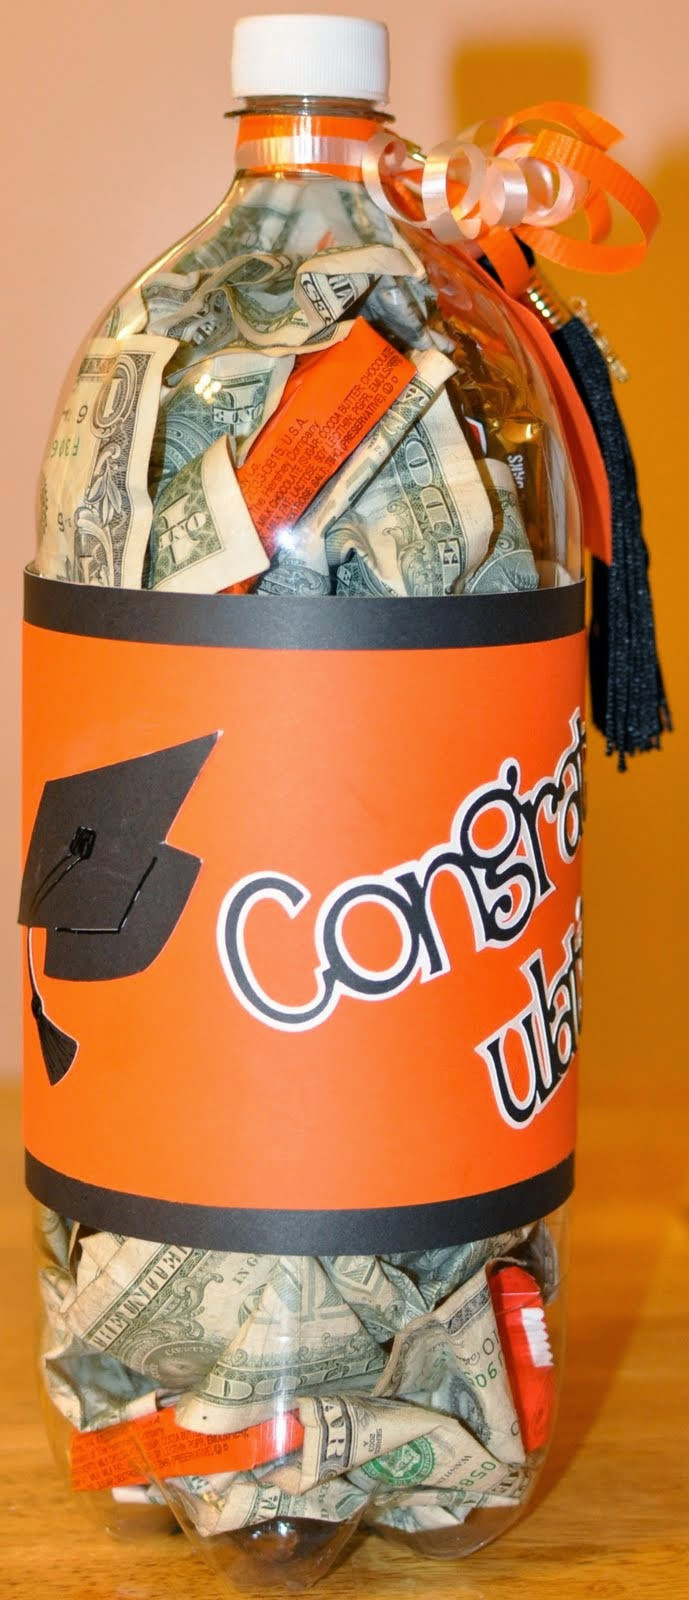 Graduation Money Gift Ideas
 GIFTS THAT SAY WOW Fun Crafts and Gift Ideas Graduation